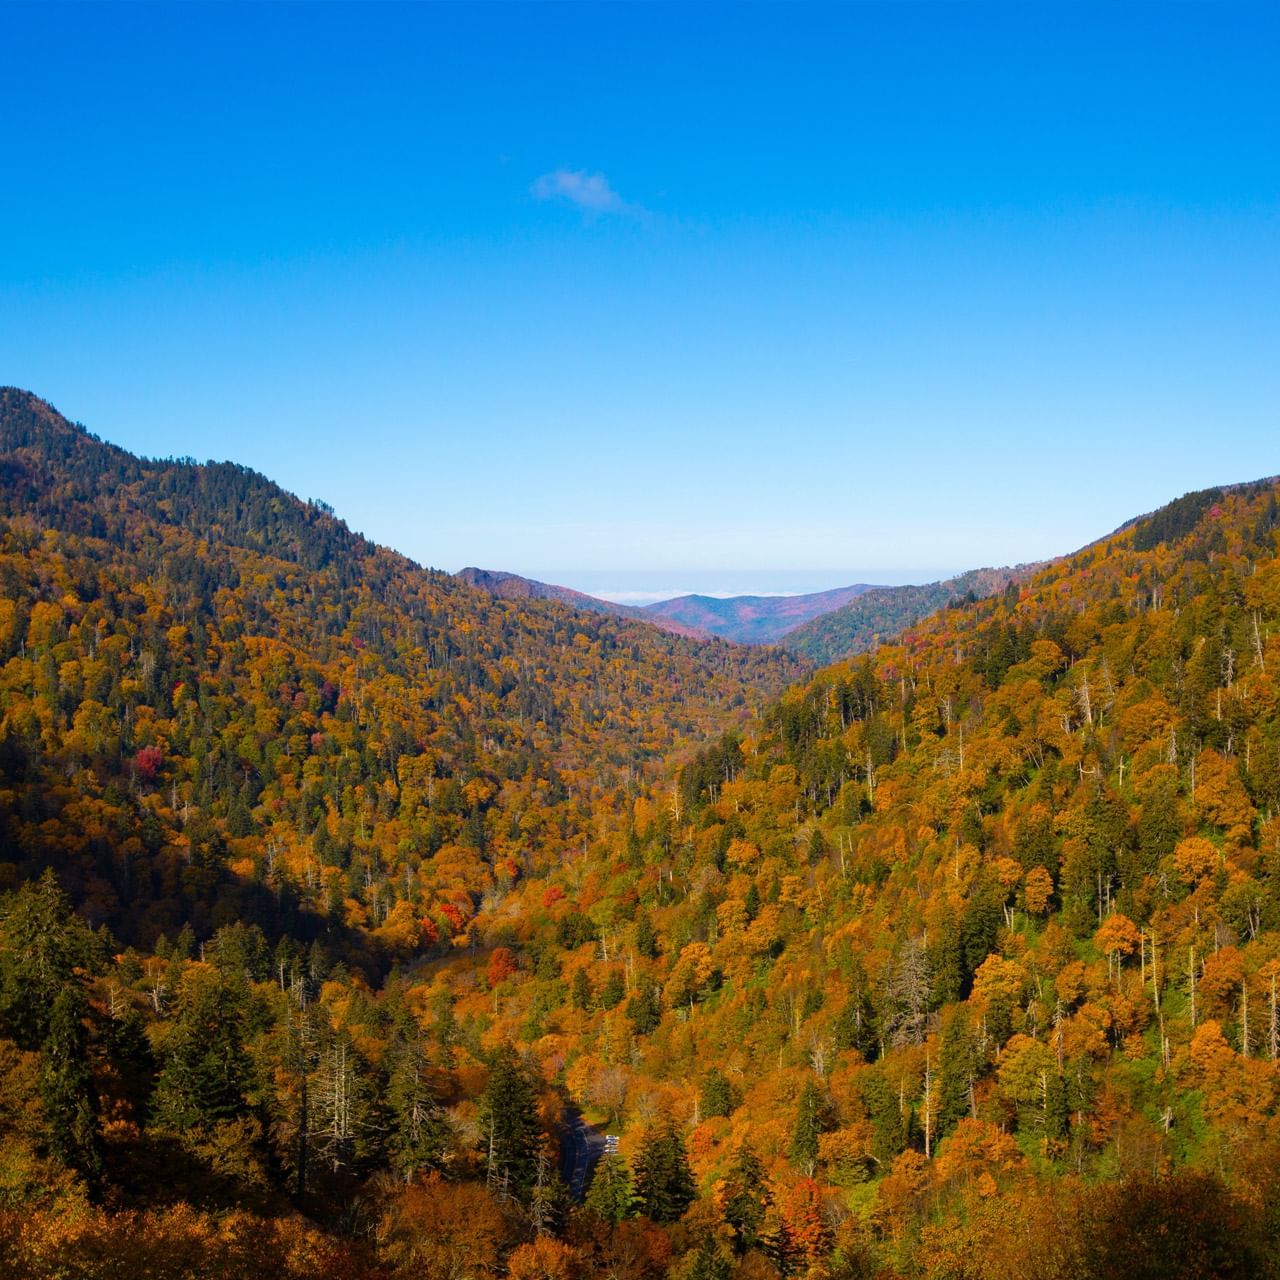 Fall Foliage in the Great Smoky Mountains